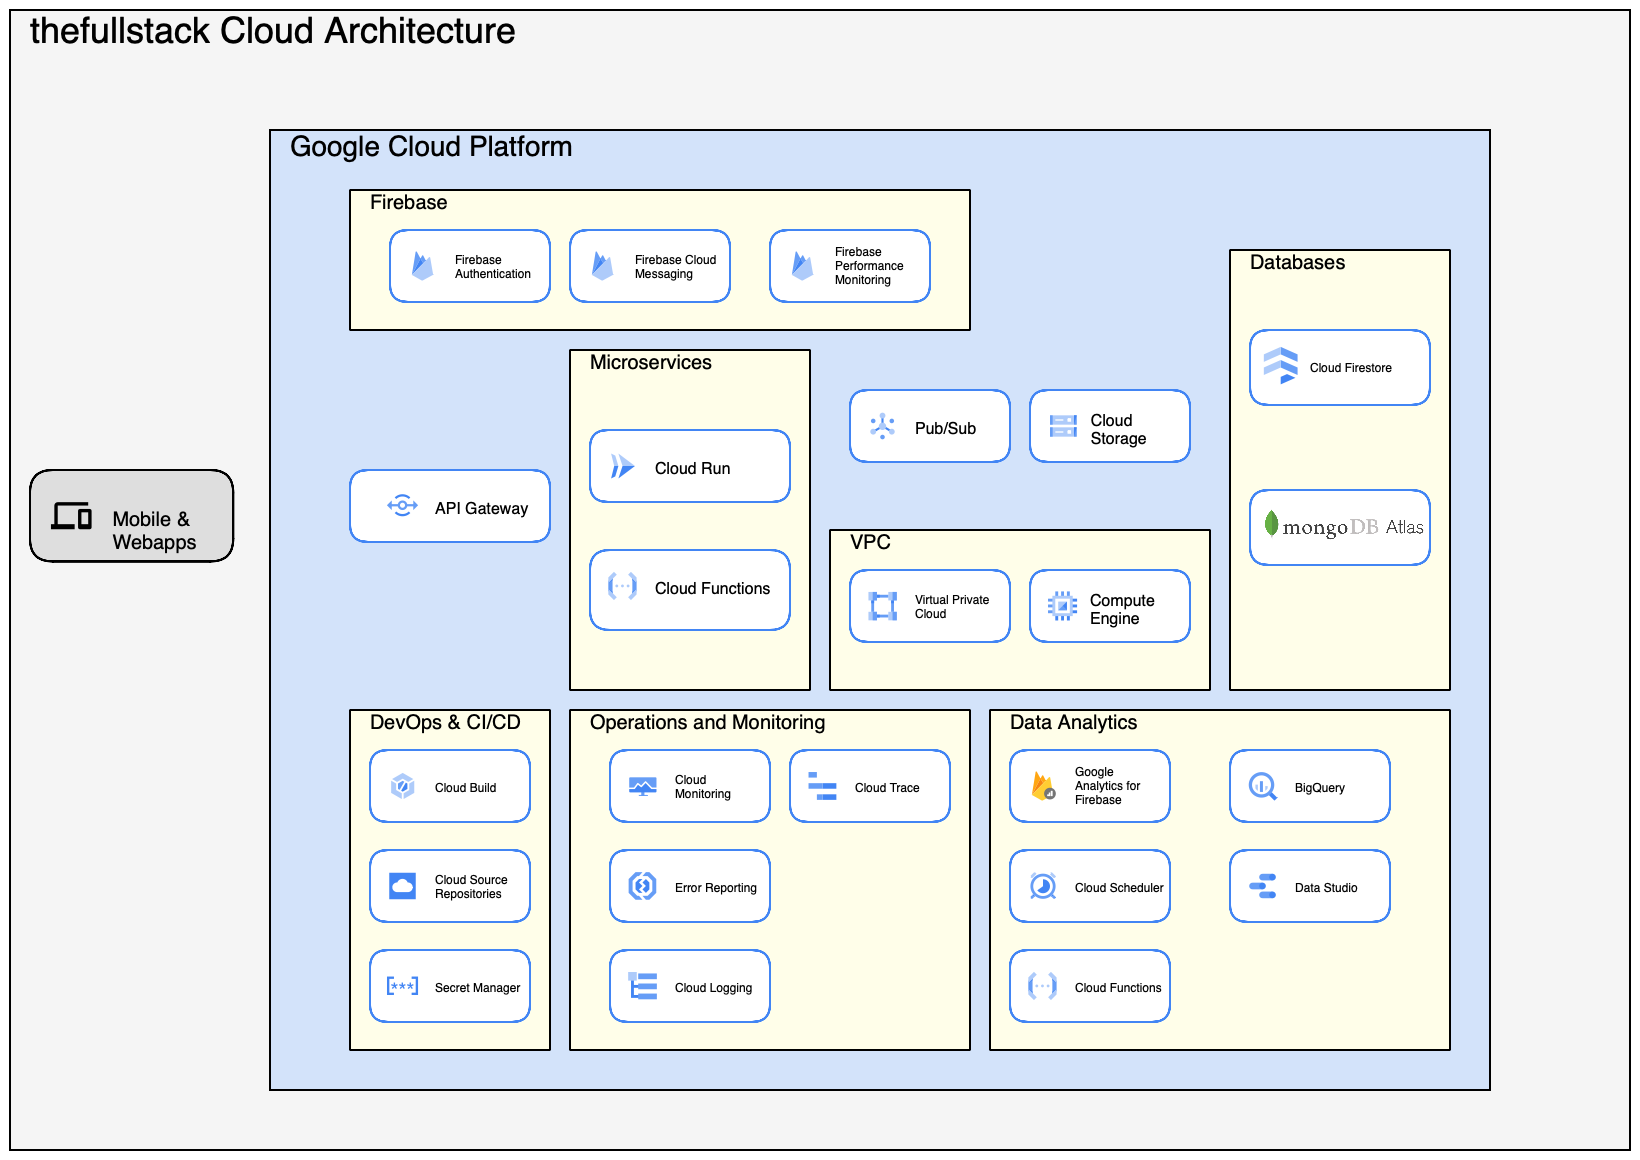 GCP Architecture and thefullstack